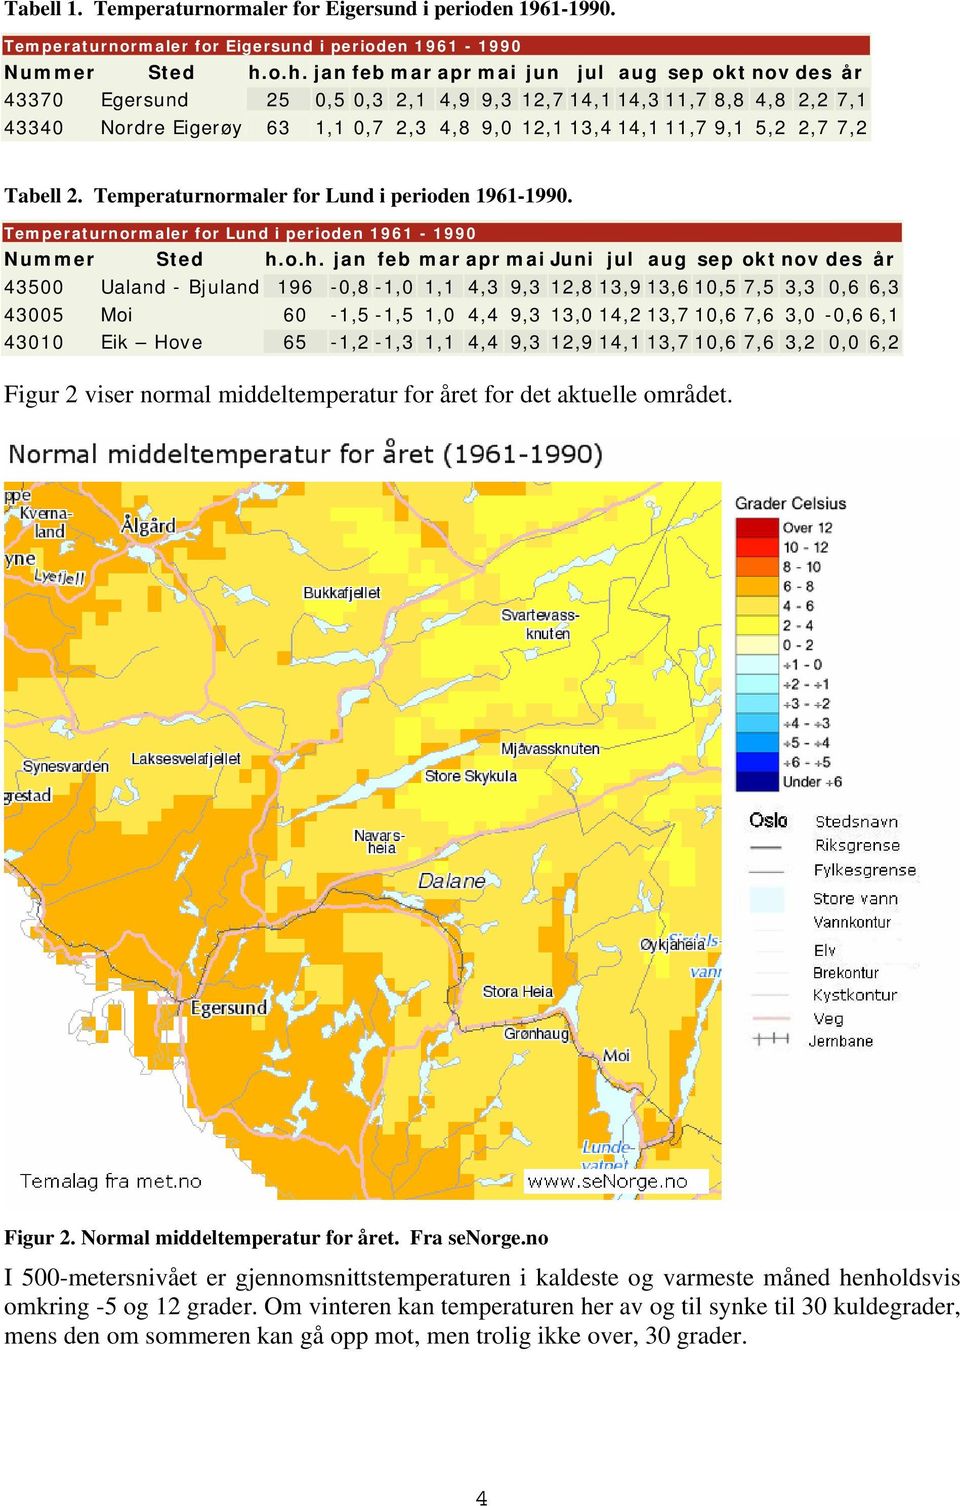 5,2 2,7 7,2 Tabell 2. Temperaturnormaler for Lund i perioden 1961-1990. Temperaturnormaler for Lund i perioden 1961-1990 Nummer Sted h.